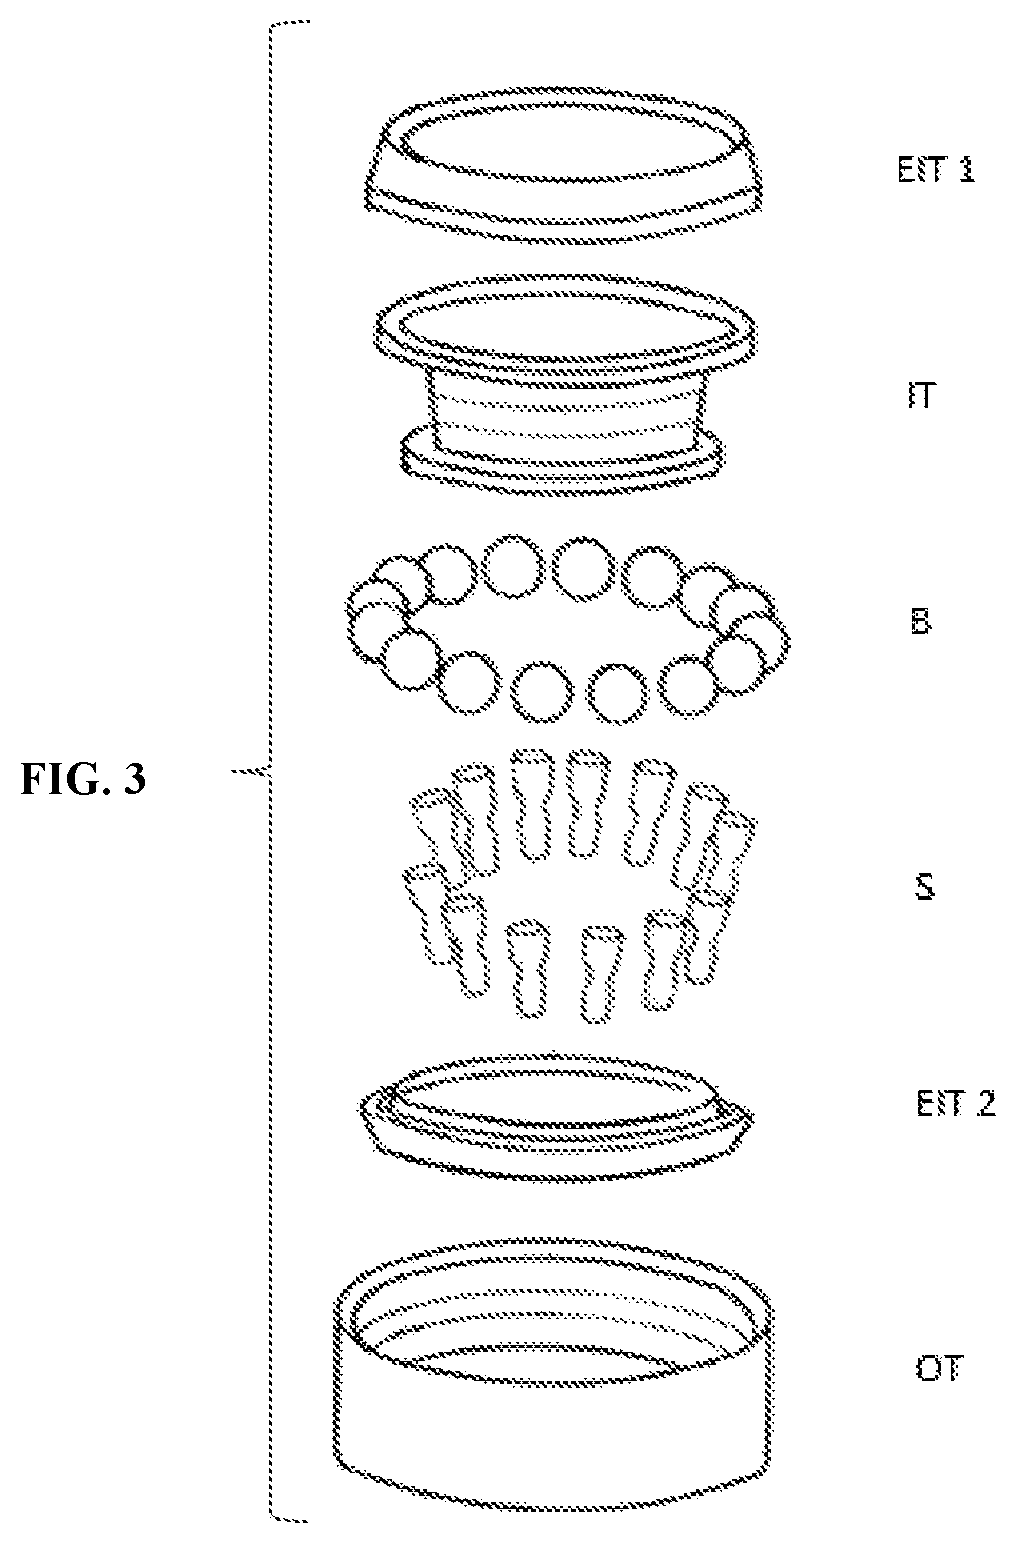 Angular contact and purely axial bearings with anti-friction separators